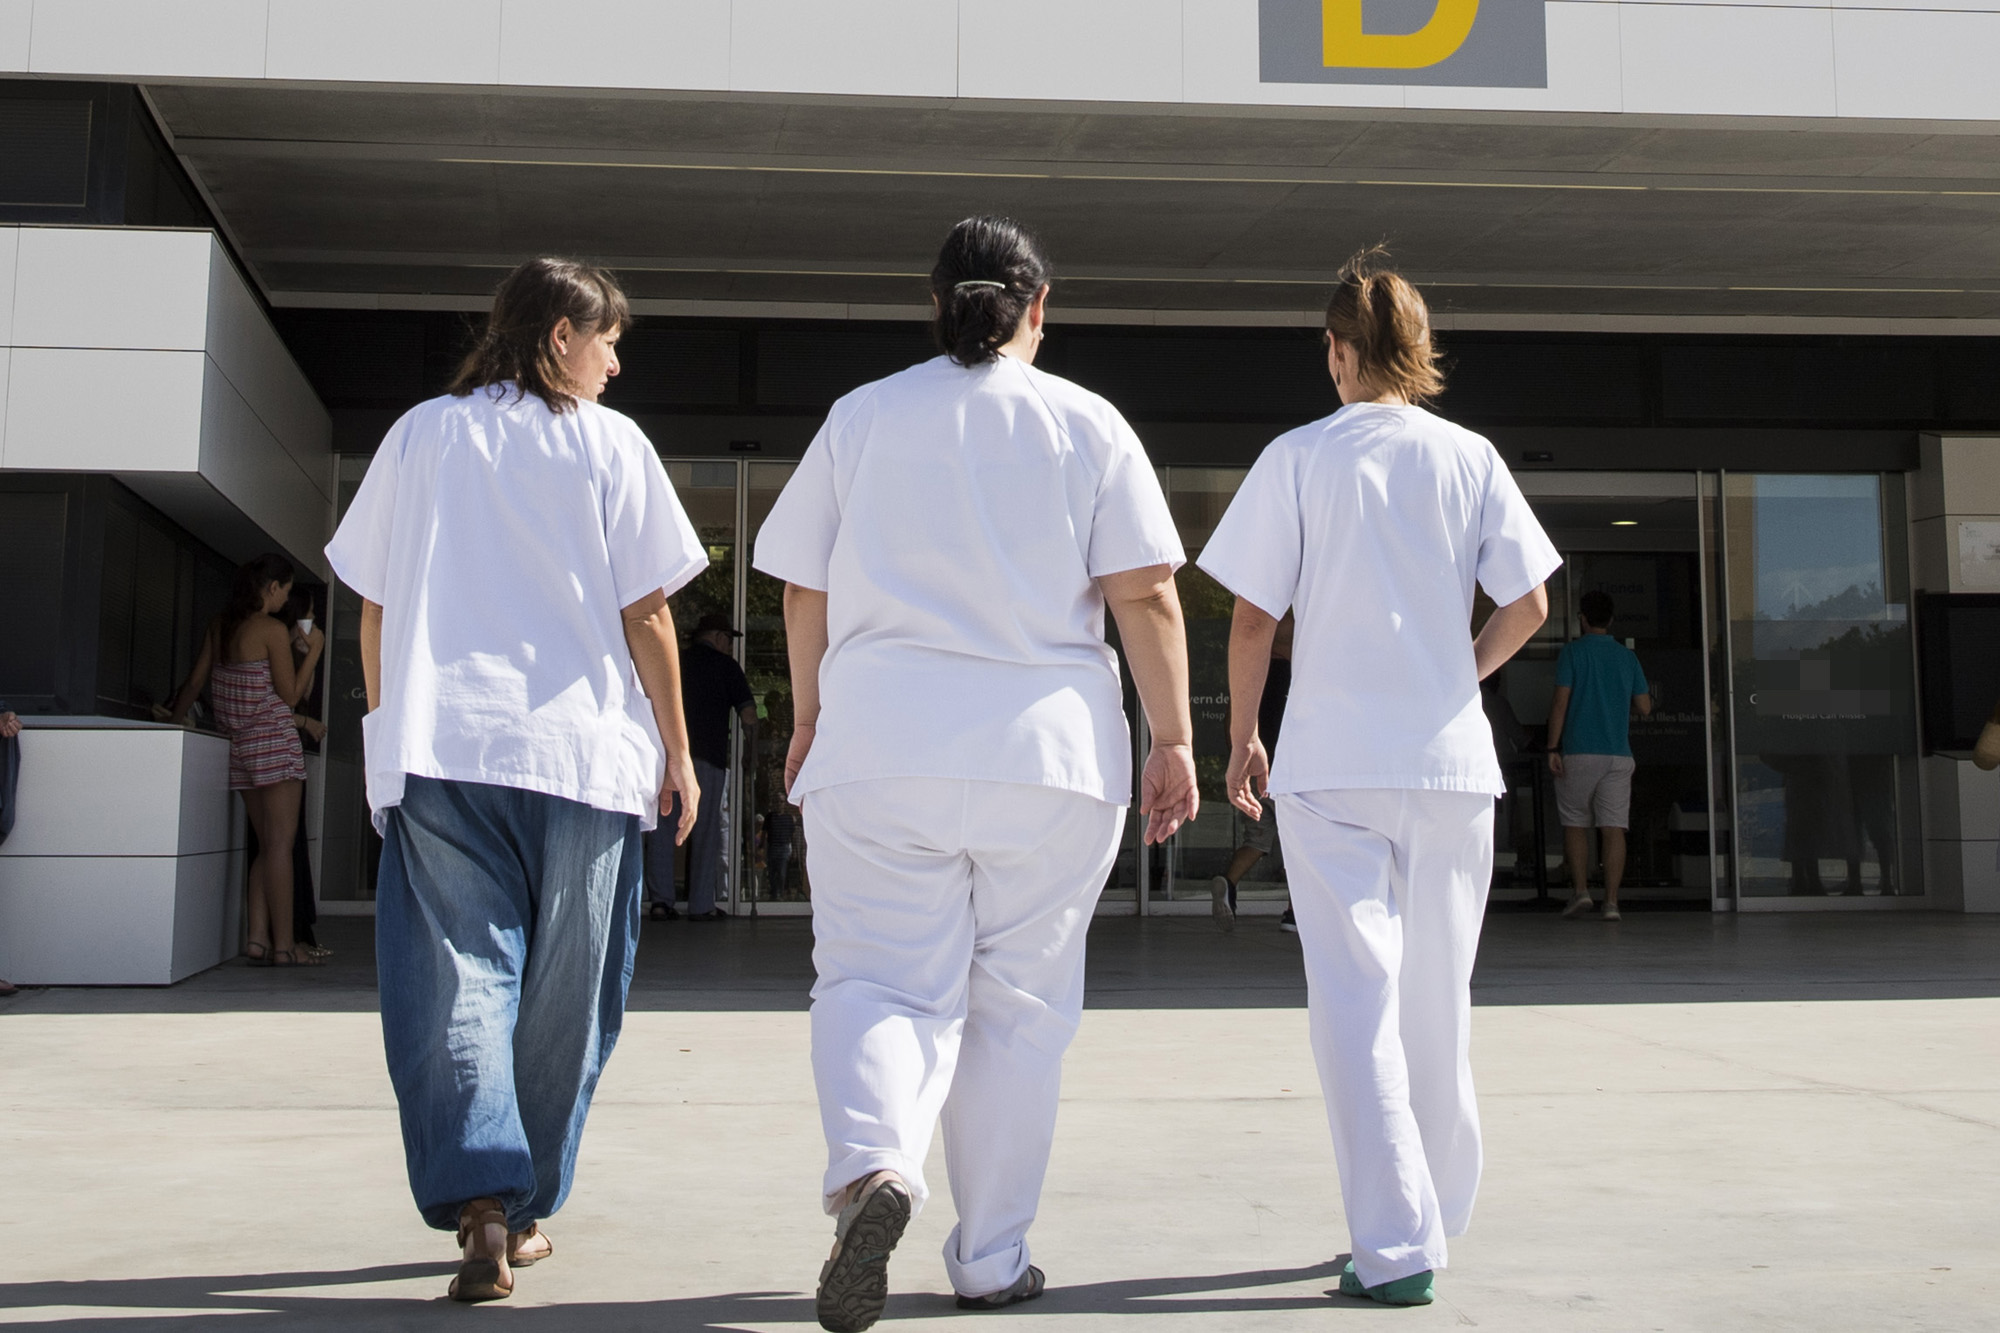 Three workers from the Hospital "Can Misses" enter the building on the island of Ibiza, on August 11, 2017. Known as much as a wild party island as a place of tranquility with coves of turquoise blue water, Ibiza has increased in popularity over the years. But behind the sea, sun, dancing and yachts lurks a serious problem of tourism overcrowding that is preventing many locals from finding affordable accommodation. / AFP PHOTO / JAIME REINA